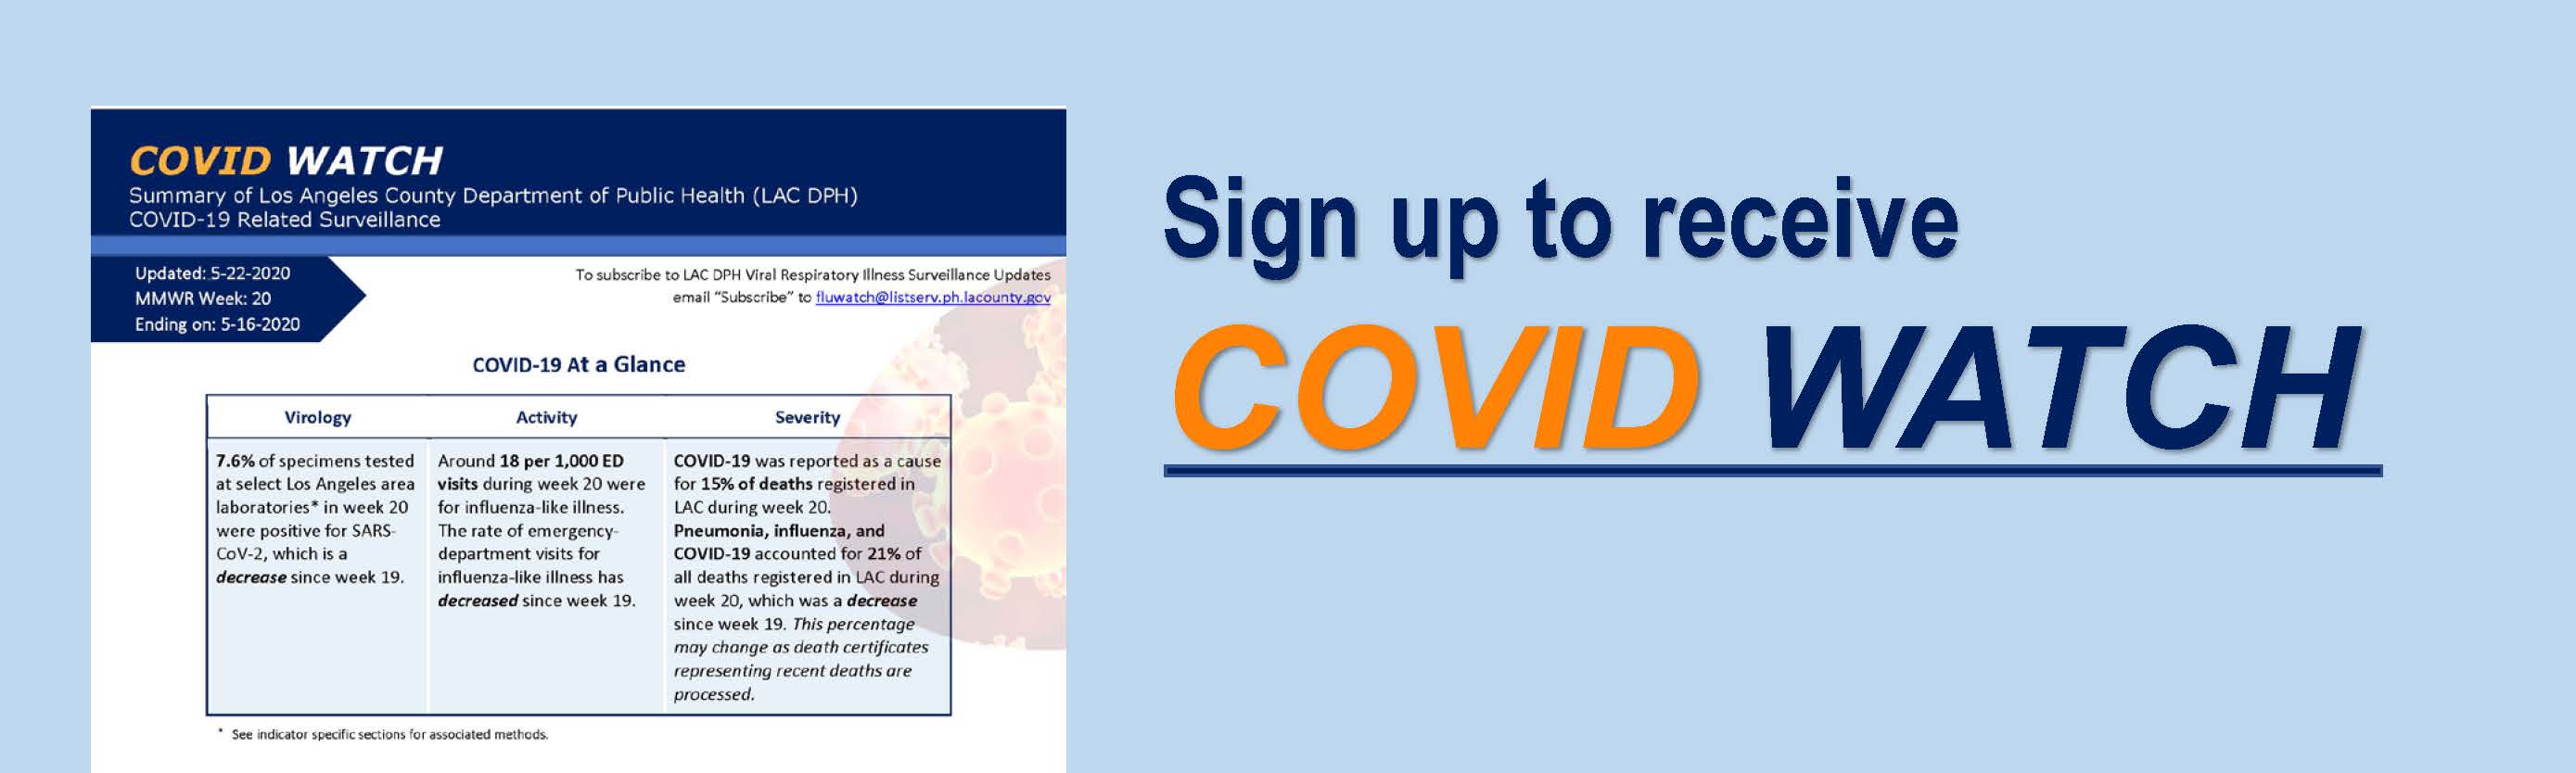 Sign up for COVID Watch